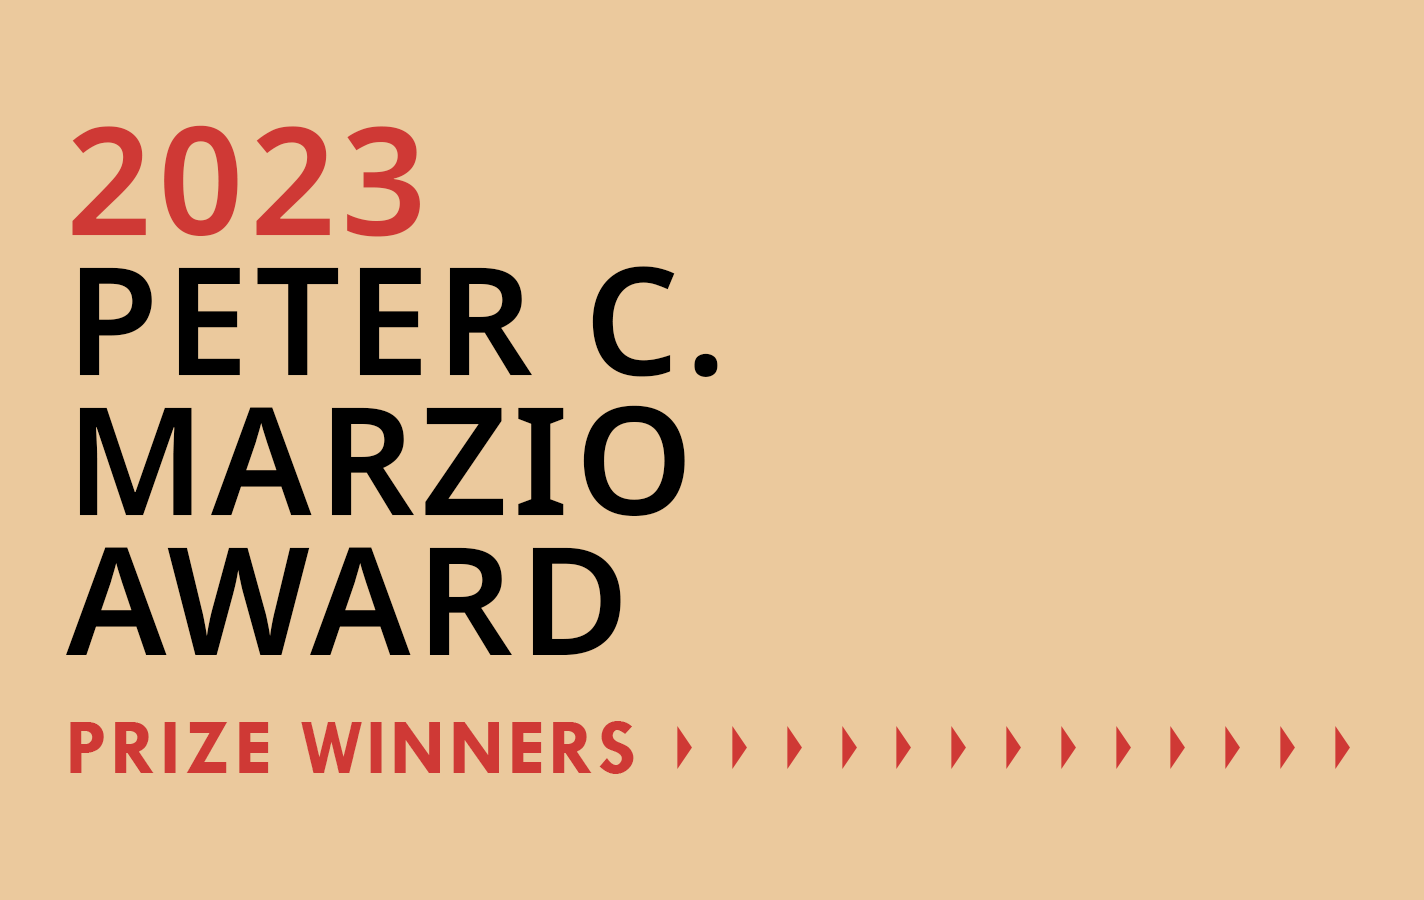 <p><strong>2023 Peter C. Marzio Award Winners Announced</strong></p>
